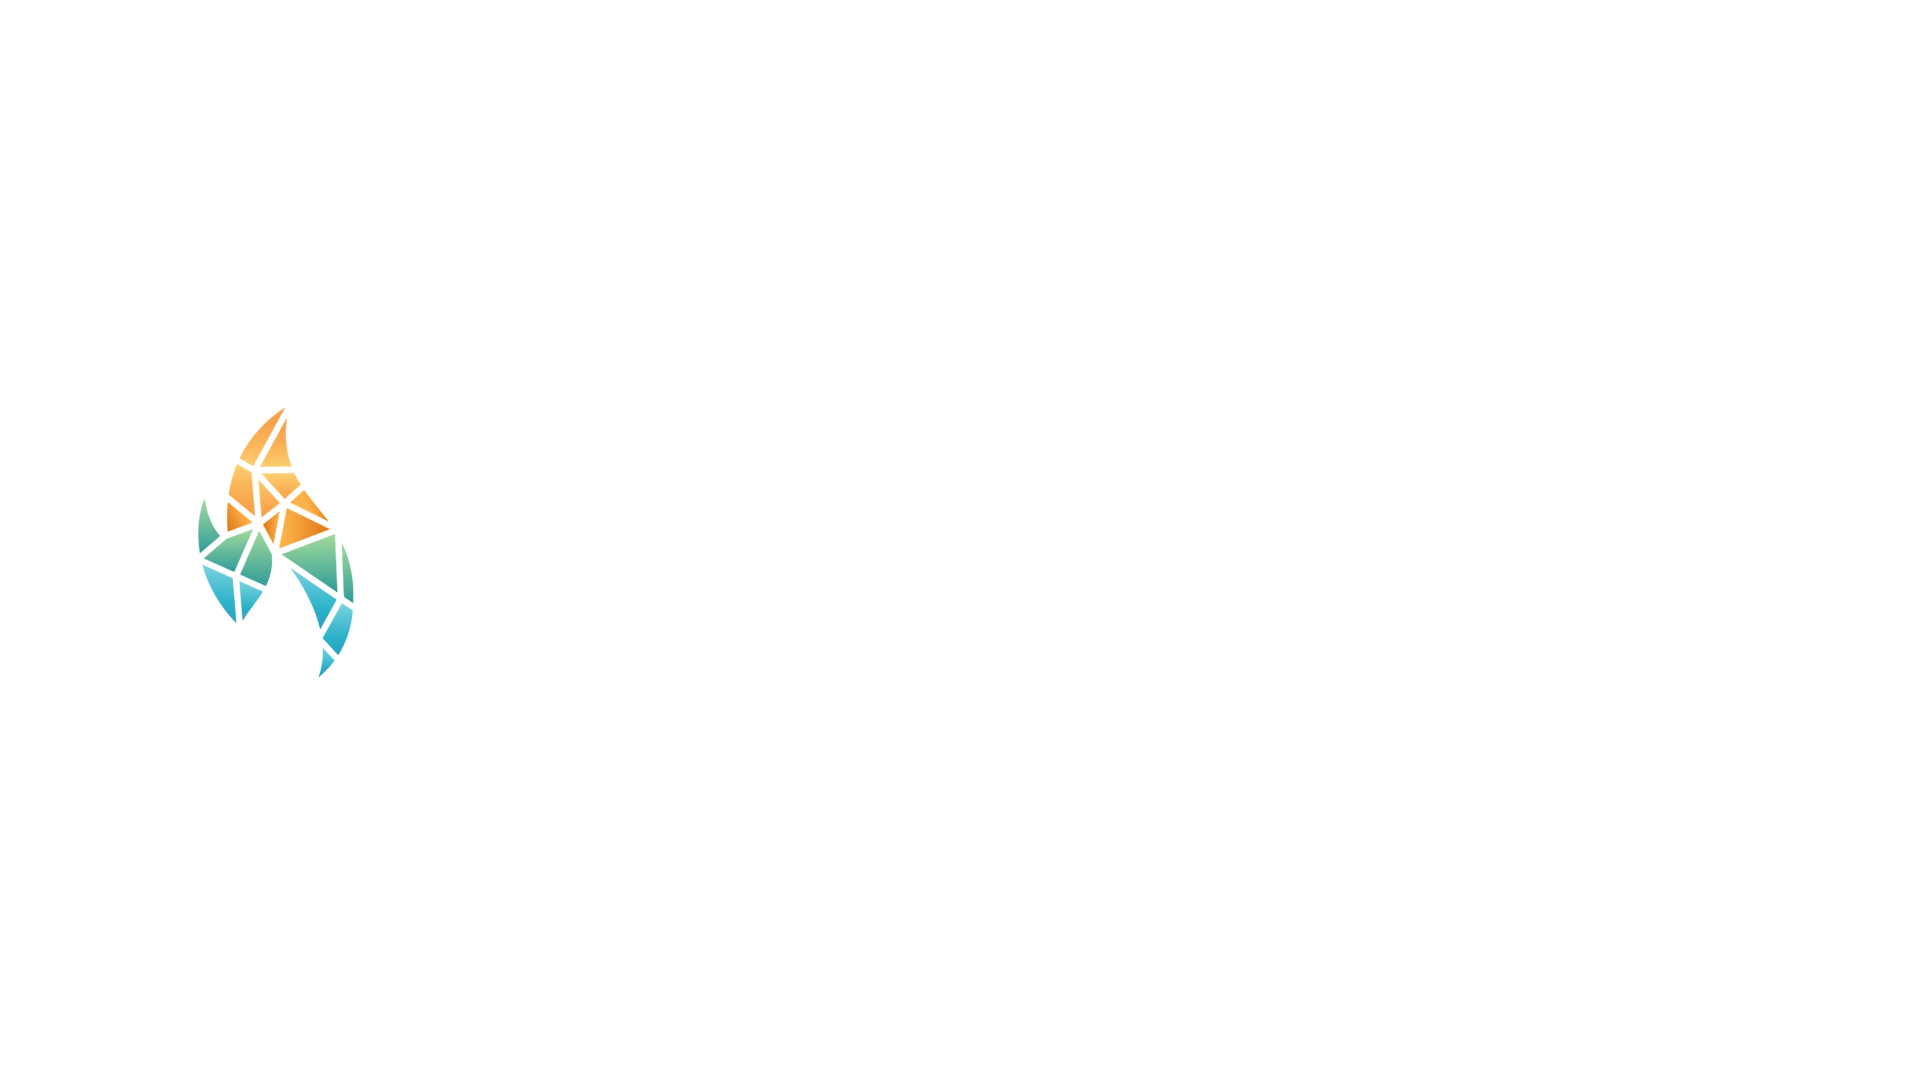 2. Equipping The Church